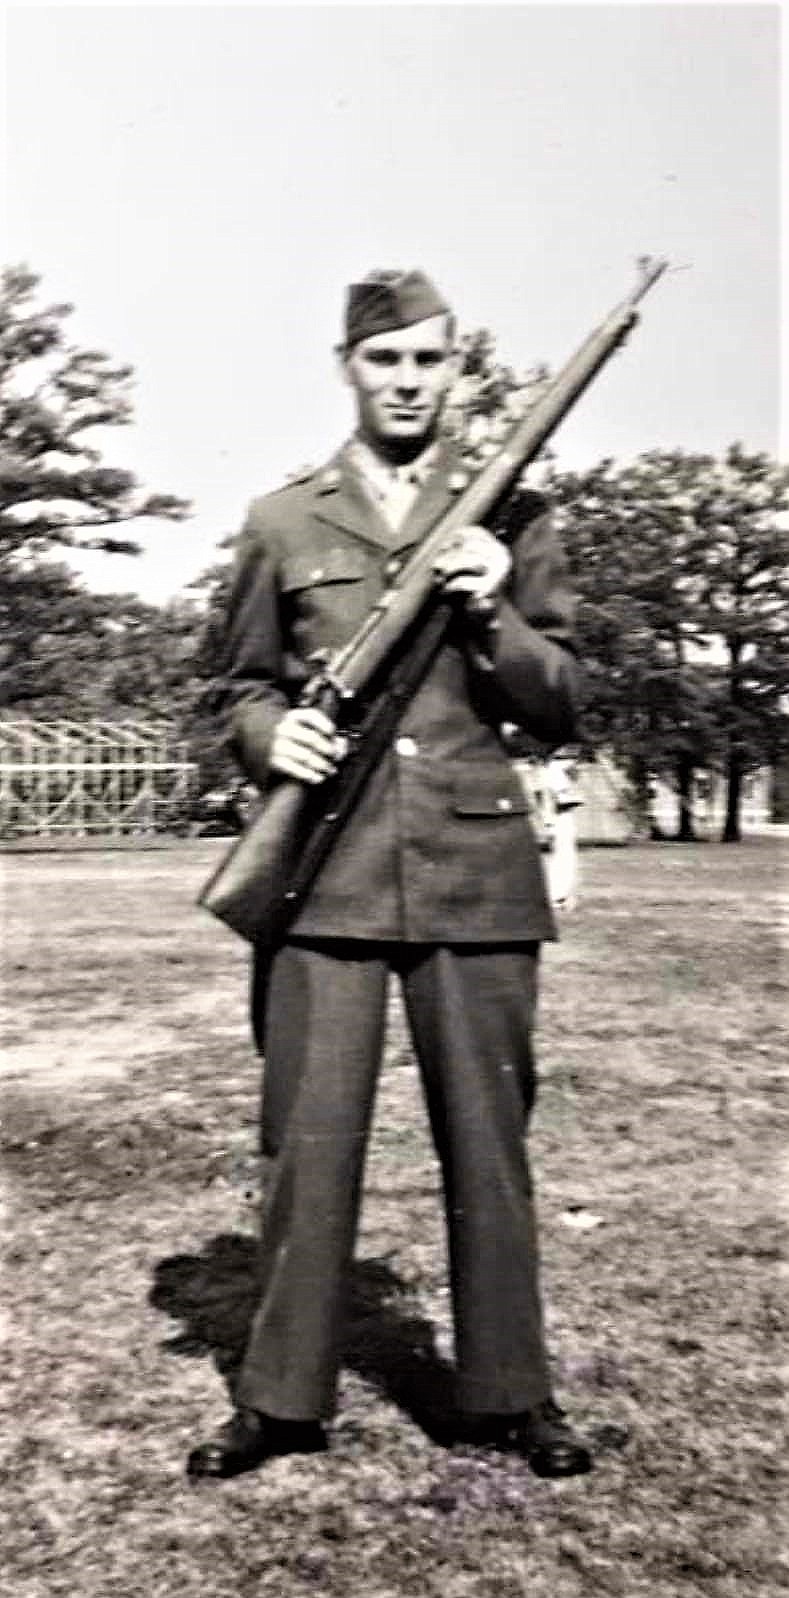 William Fancher is pictured in training with the U.S. Army during World War II. He later deployed to France, where he met Michel Schuer’s mother.
(Courtesy/Becky Landreth Henson)